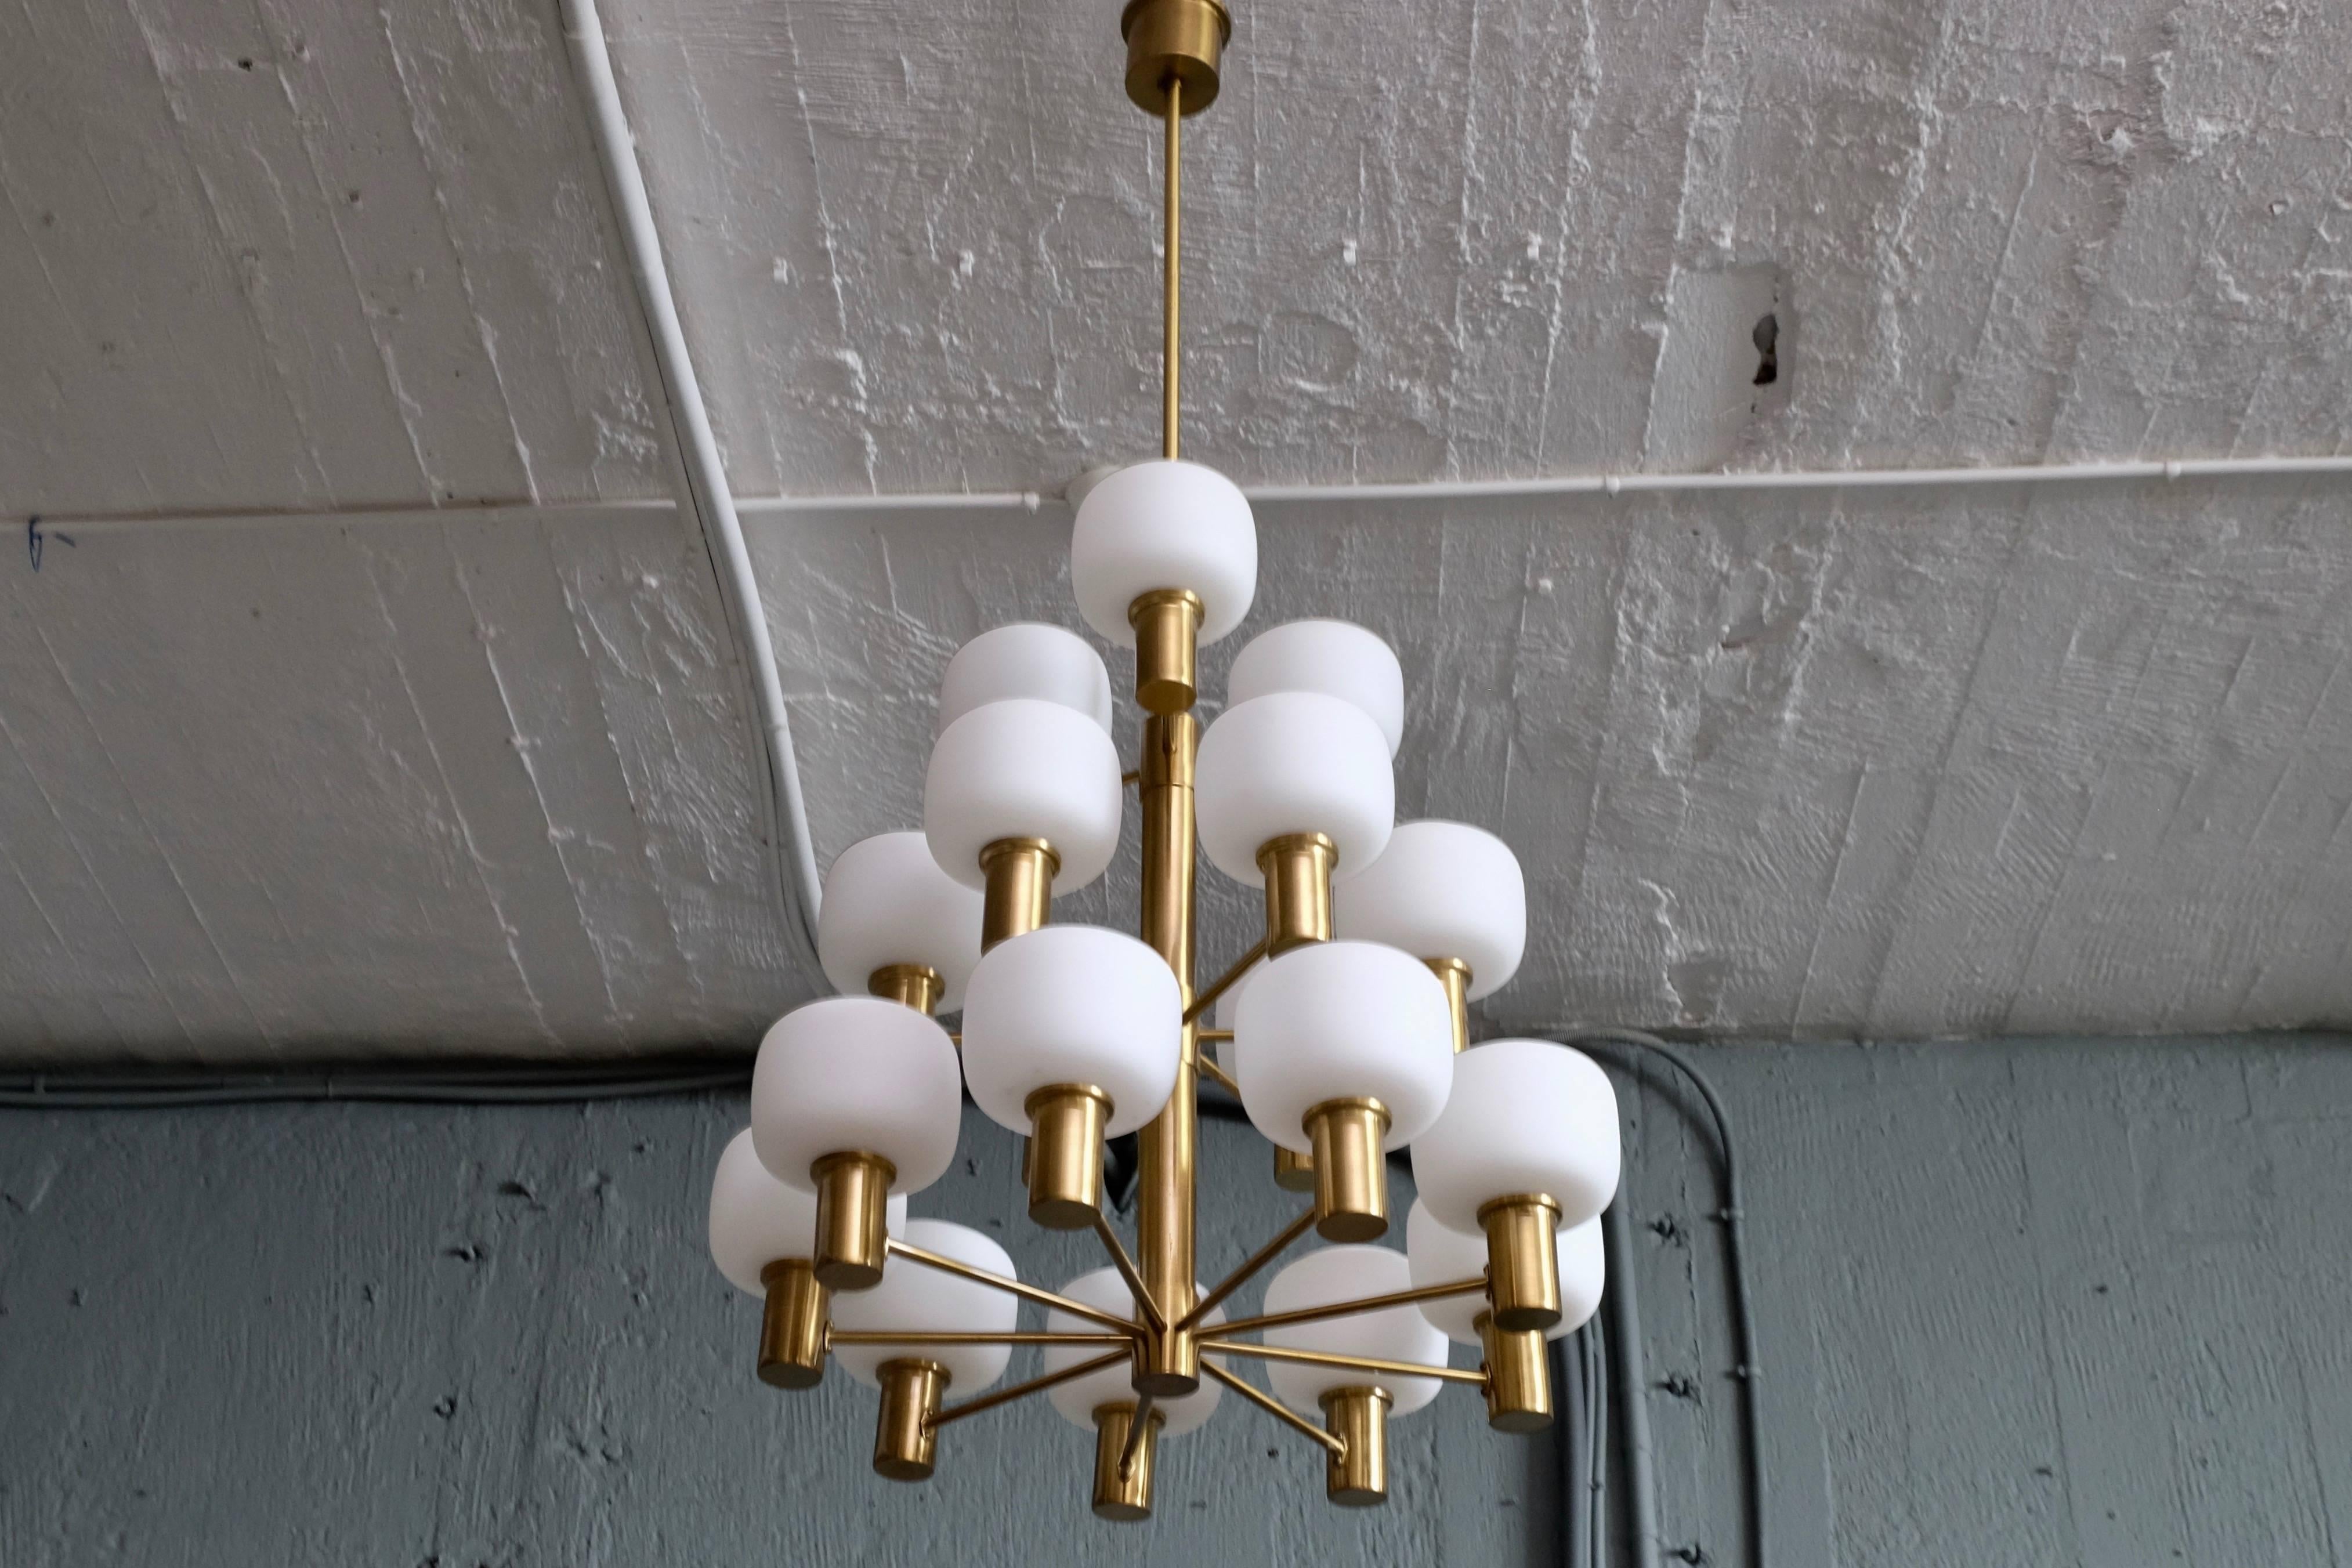 Excellent condition. Produced by ASEA, Sweden, 1950s. Brass and opaline glass.
Measures: Diameter 60 cm
Height: Adjustable according to your wishes, minimum 60 cm.

$6,000 is for one (1) chandelier.
      